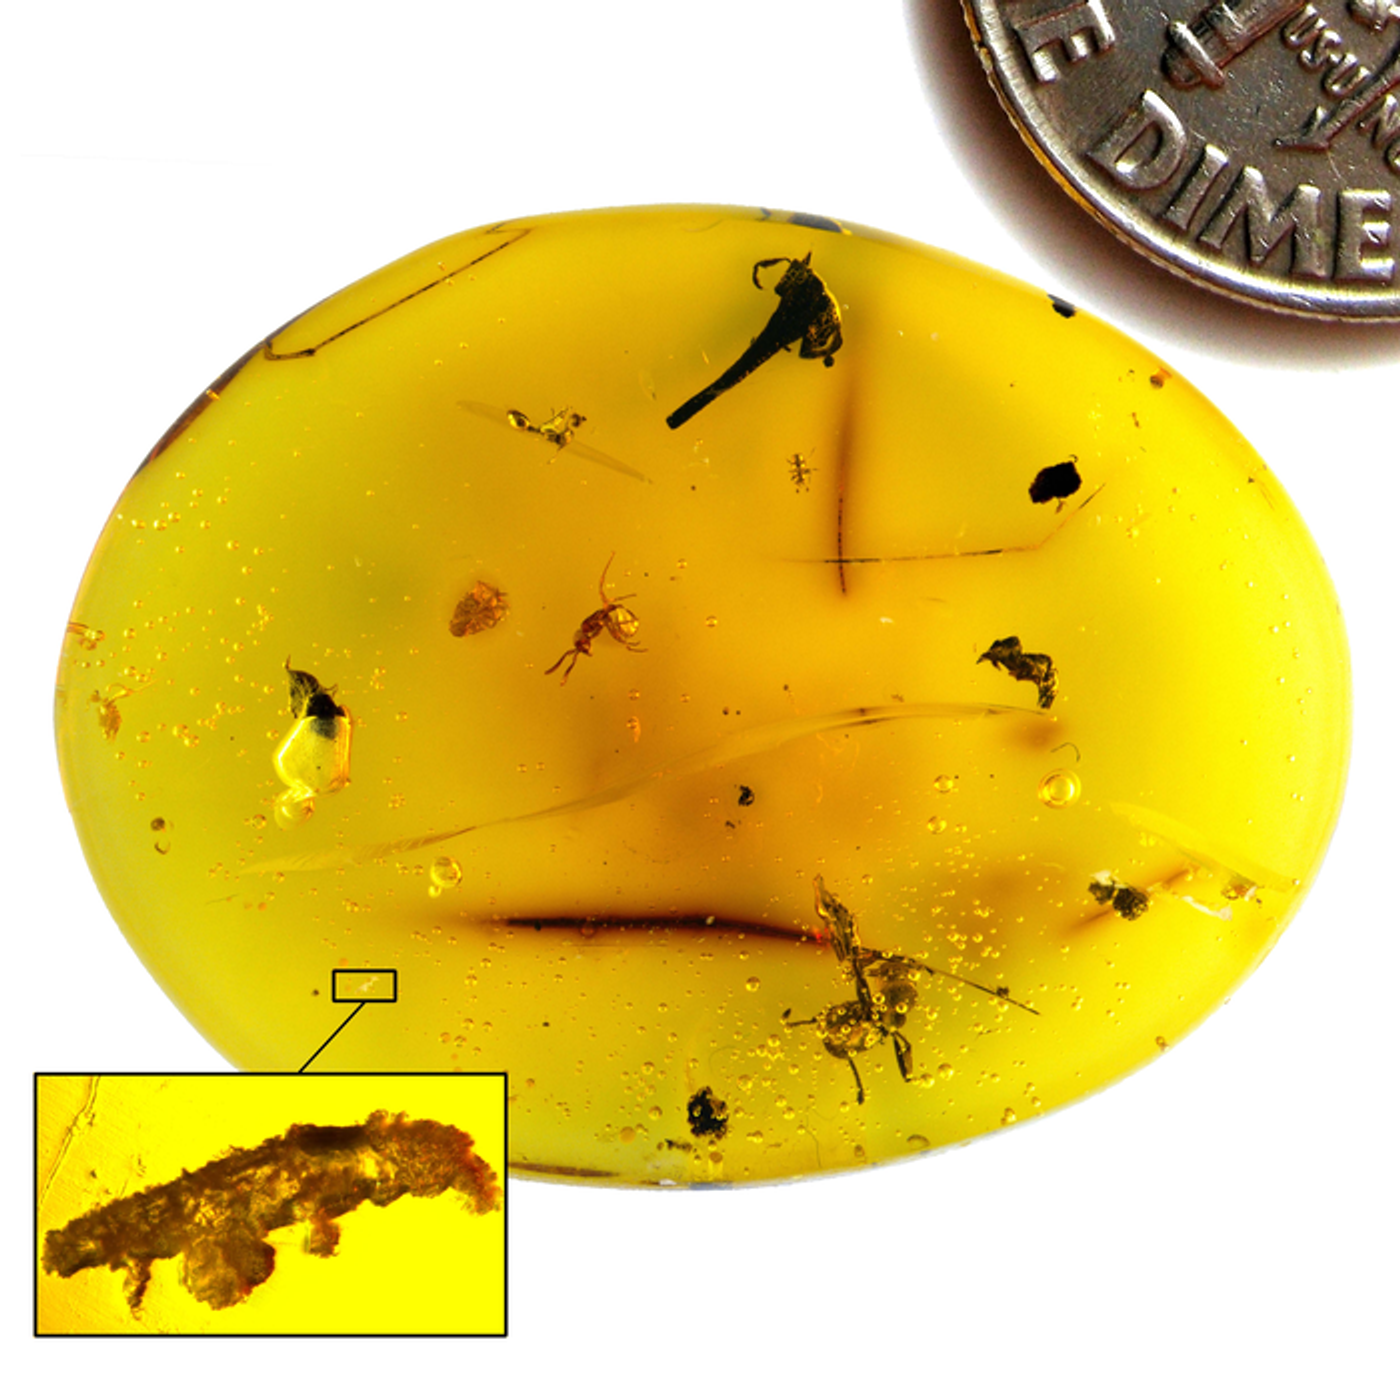 Dominican amber containing Paradoryphoribius chronocaribbeus gen. et. sp. nov. (in box), dime image digitally added for size comparison. The amber also contains three ants, a beetle, and a flower. / Credit: Phillip Barden (Harvard/NJIT)